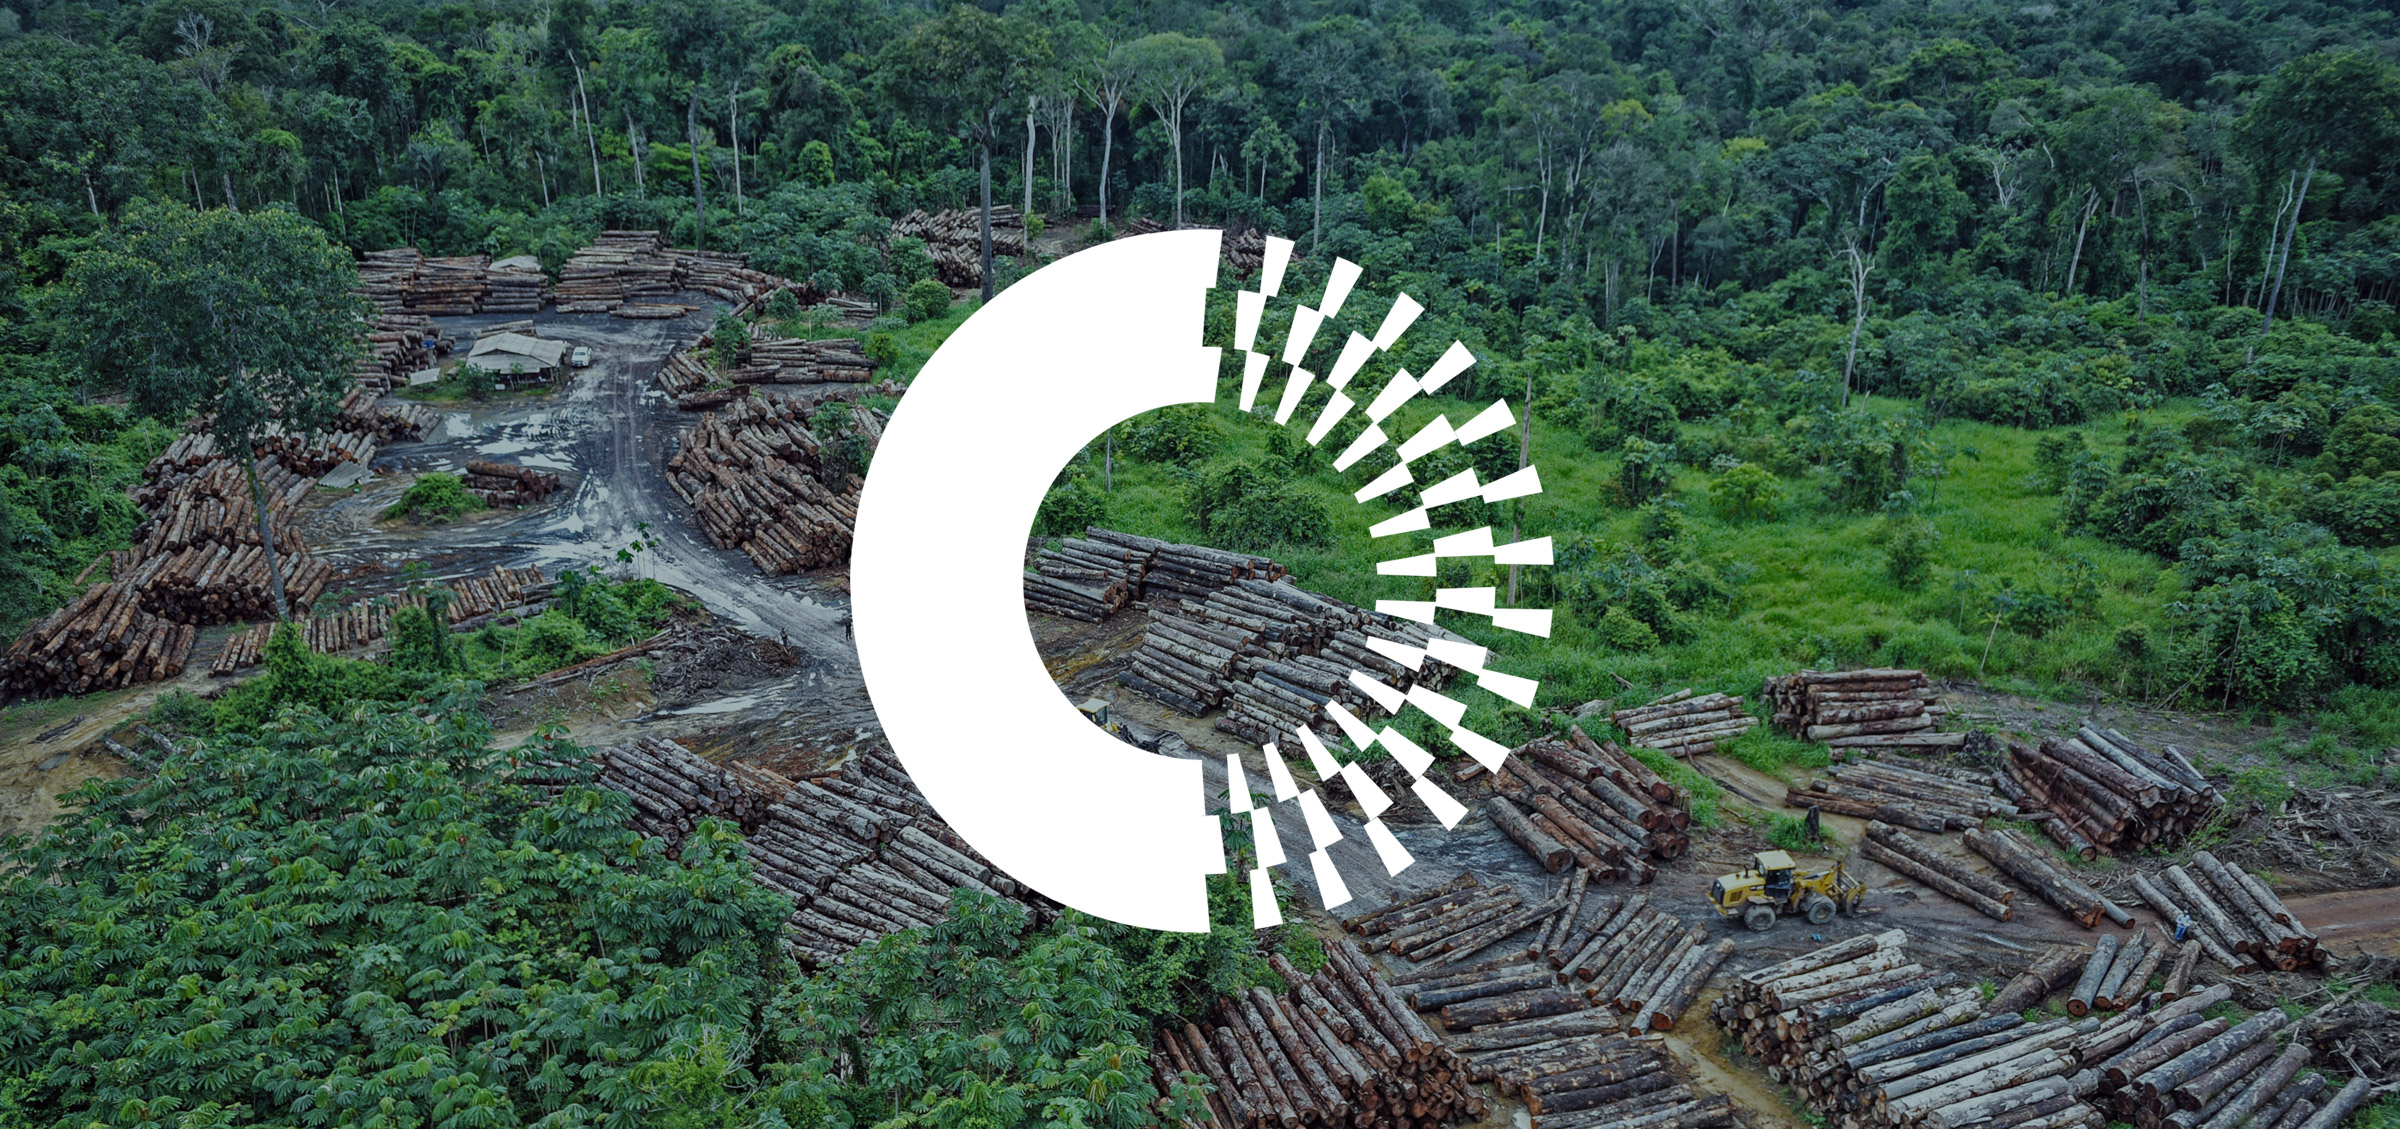 circle logo in the center of a foresting image with logs on the ground